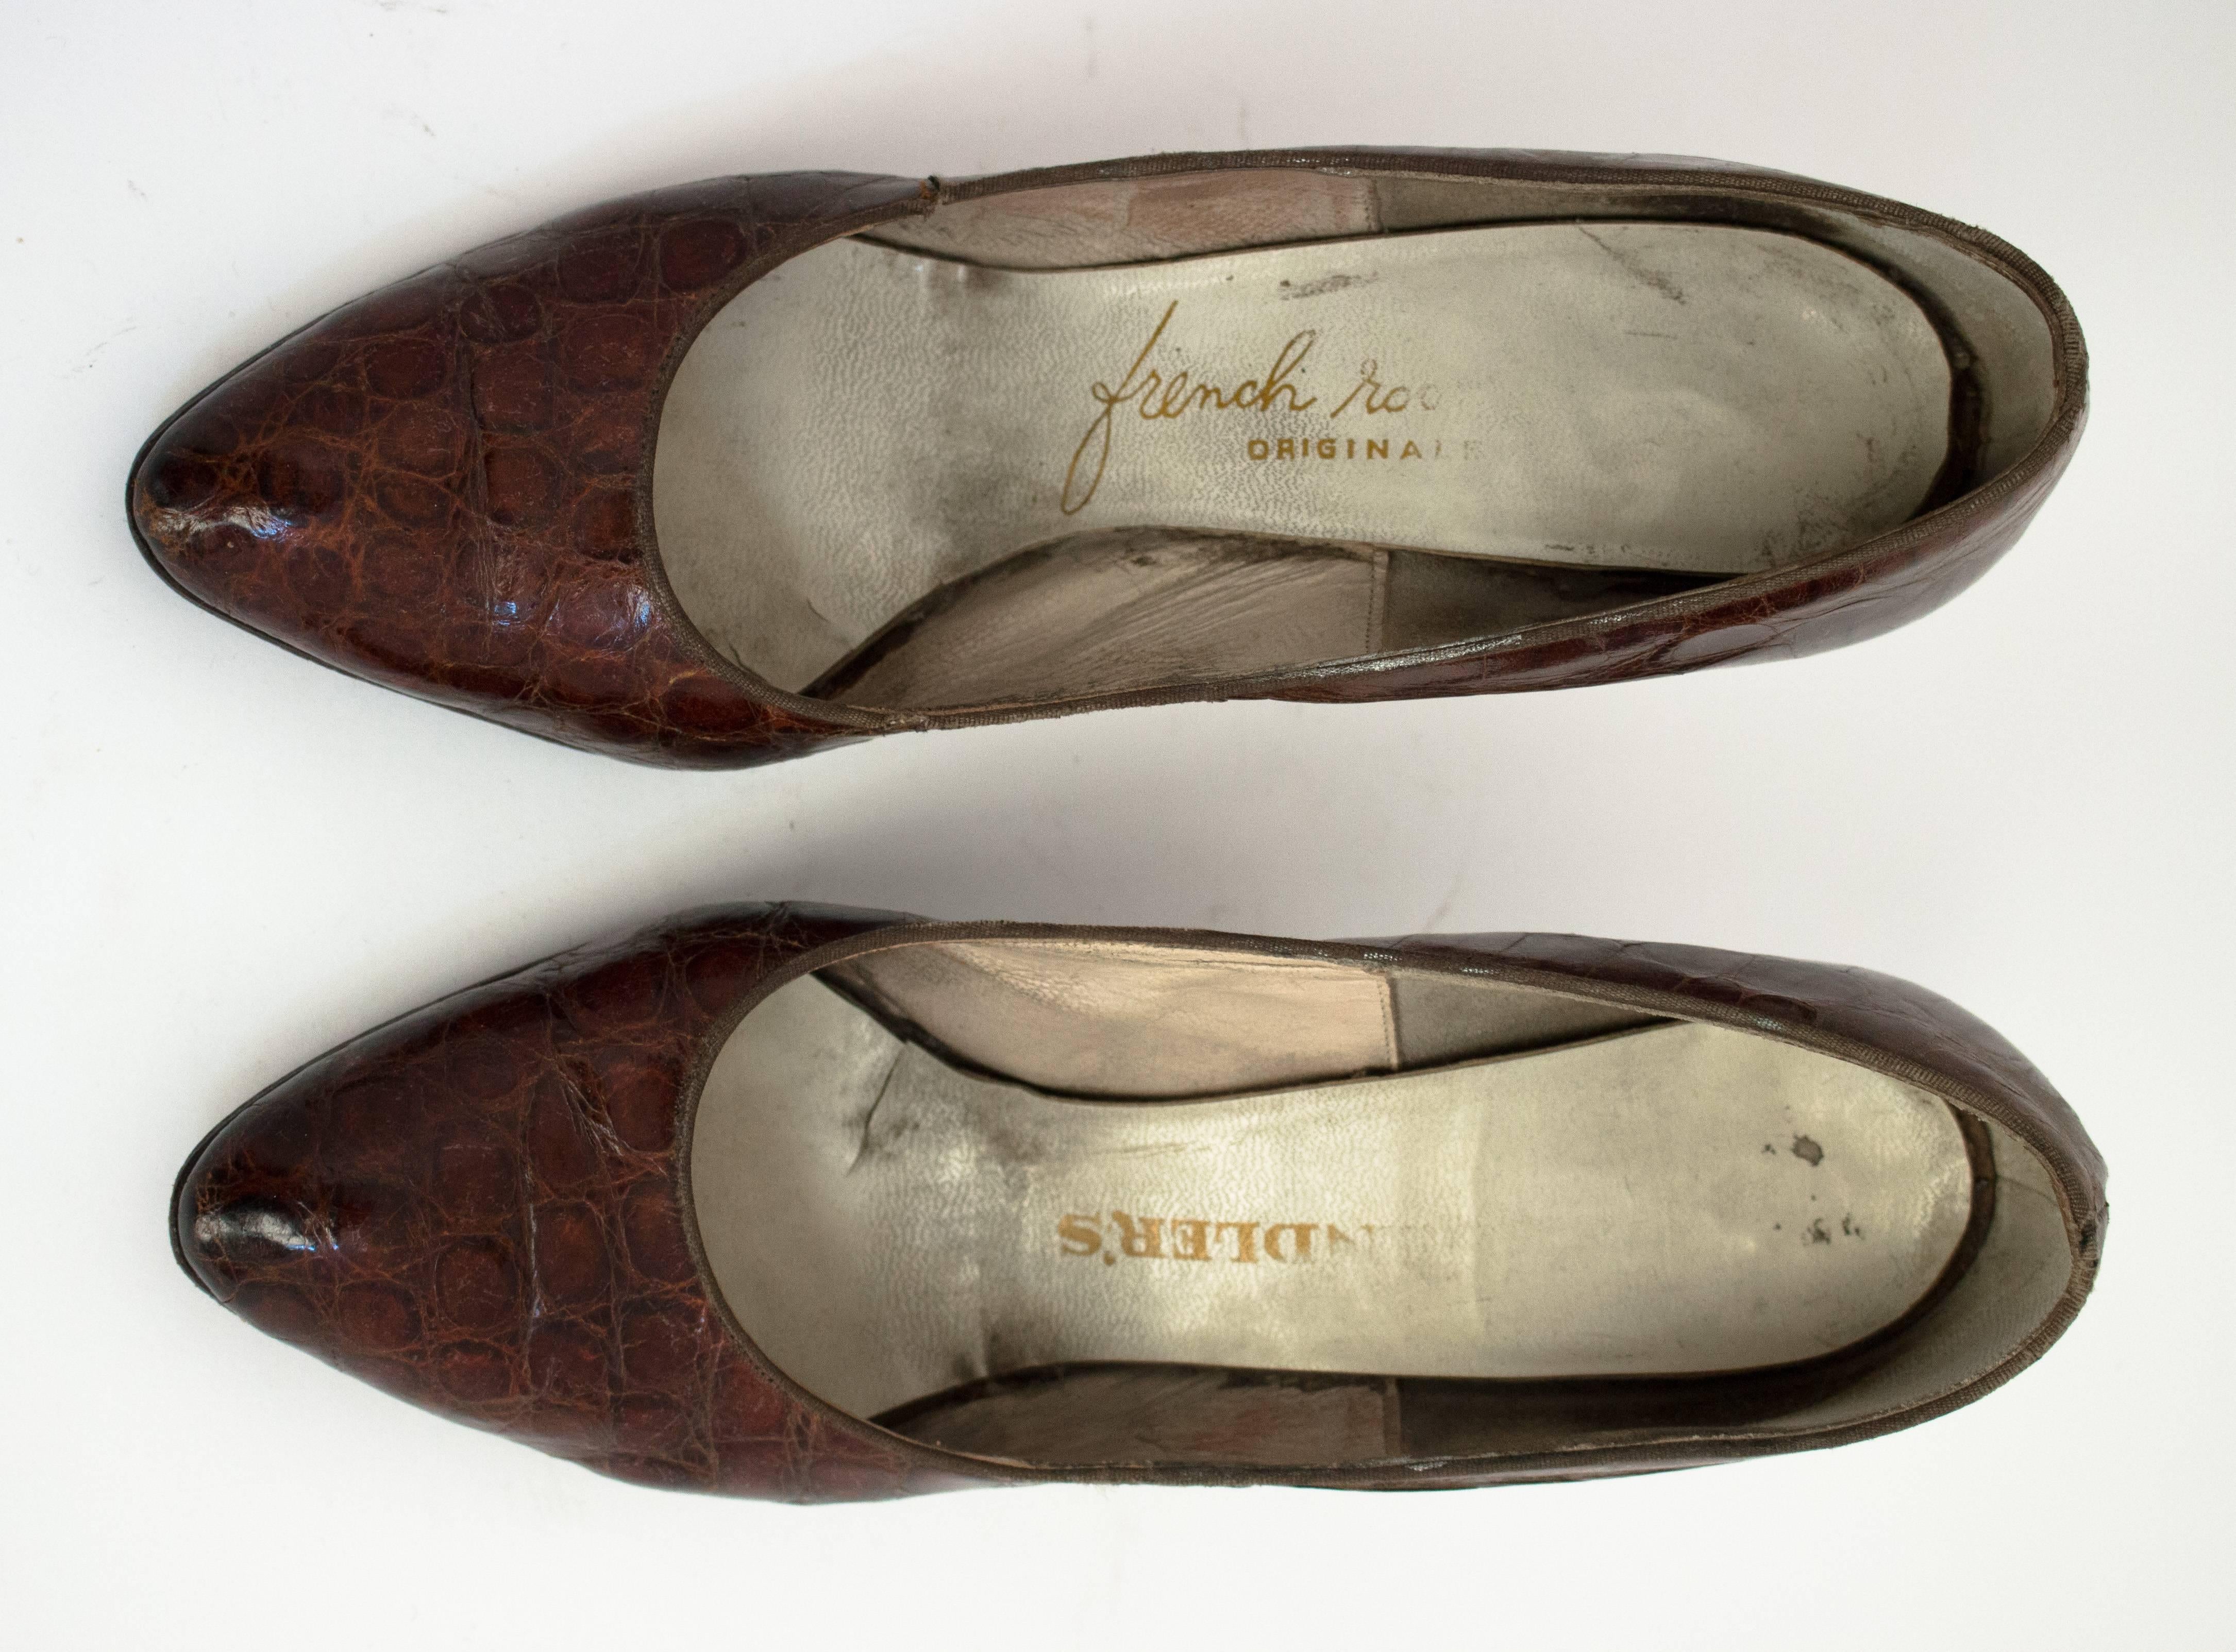 1950s alligator heels. Leather soles. Aprox. 7 1/2 N.

Palm of foot: 2 3/4"
Insole: 9 1/4"
Heel heightL 3 1/2"